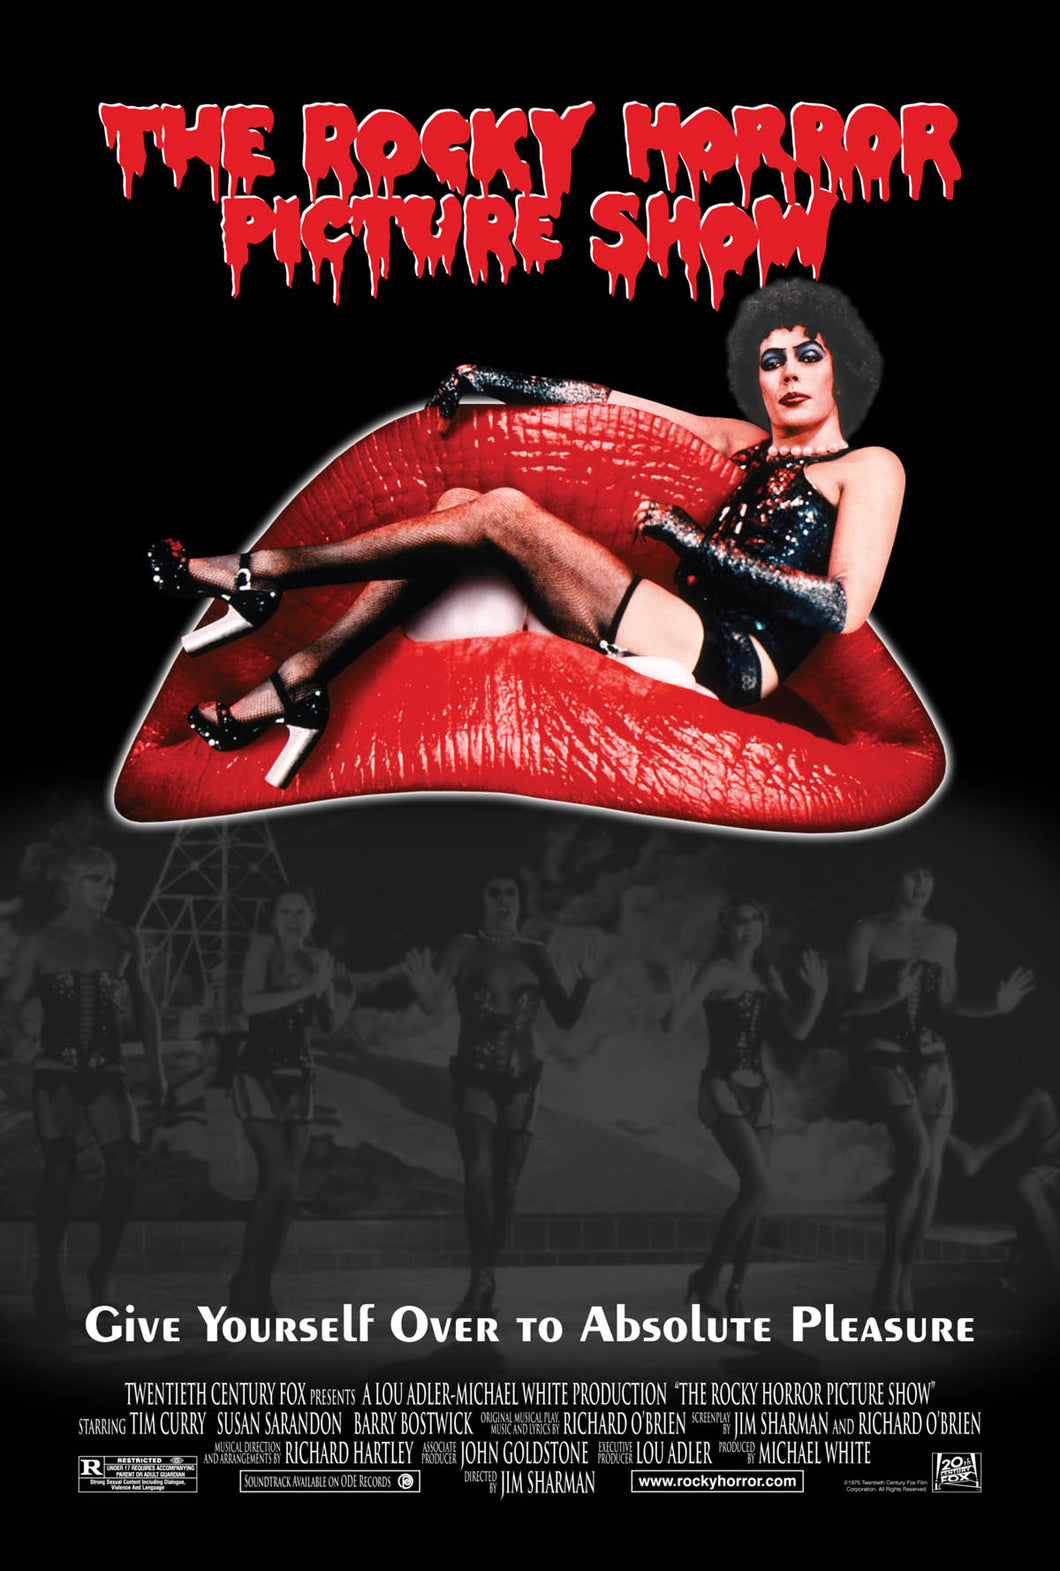 Tim Curry - Signed The Rocky Horror Picture Show Image #5 (11x17)